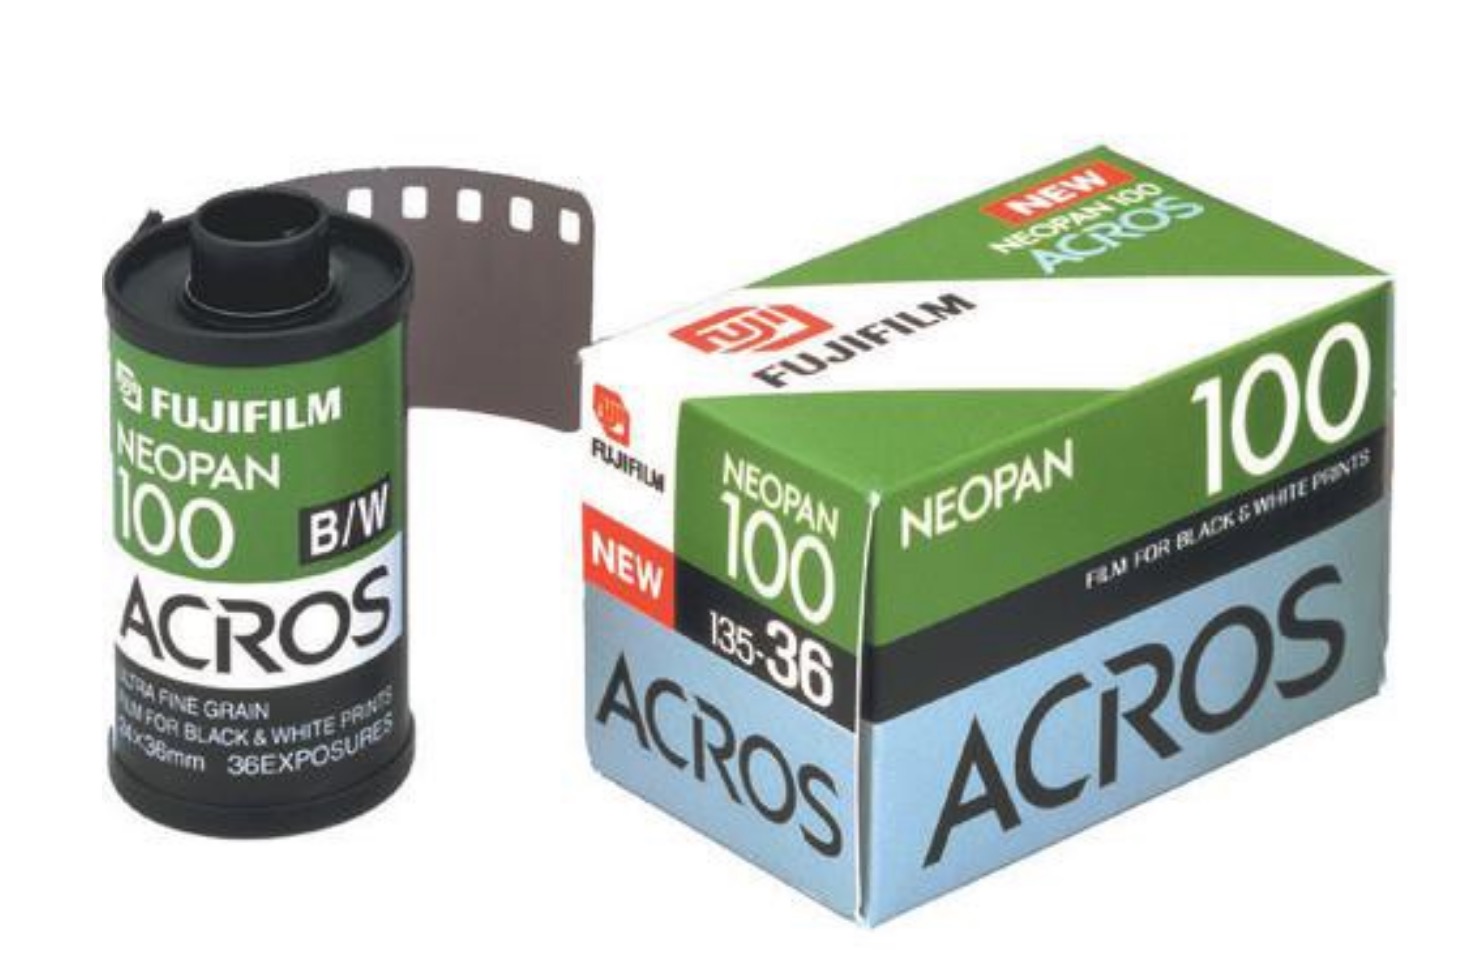 Fujifilm Acros 100 Film To Be Discontinued in October 2018, Report